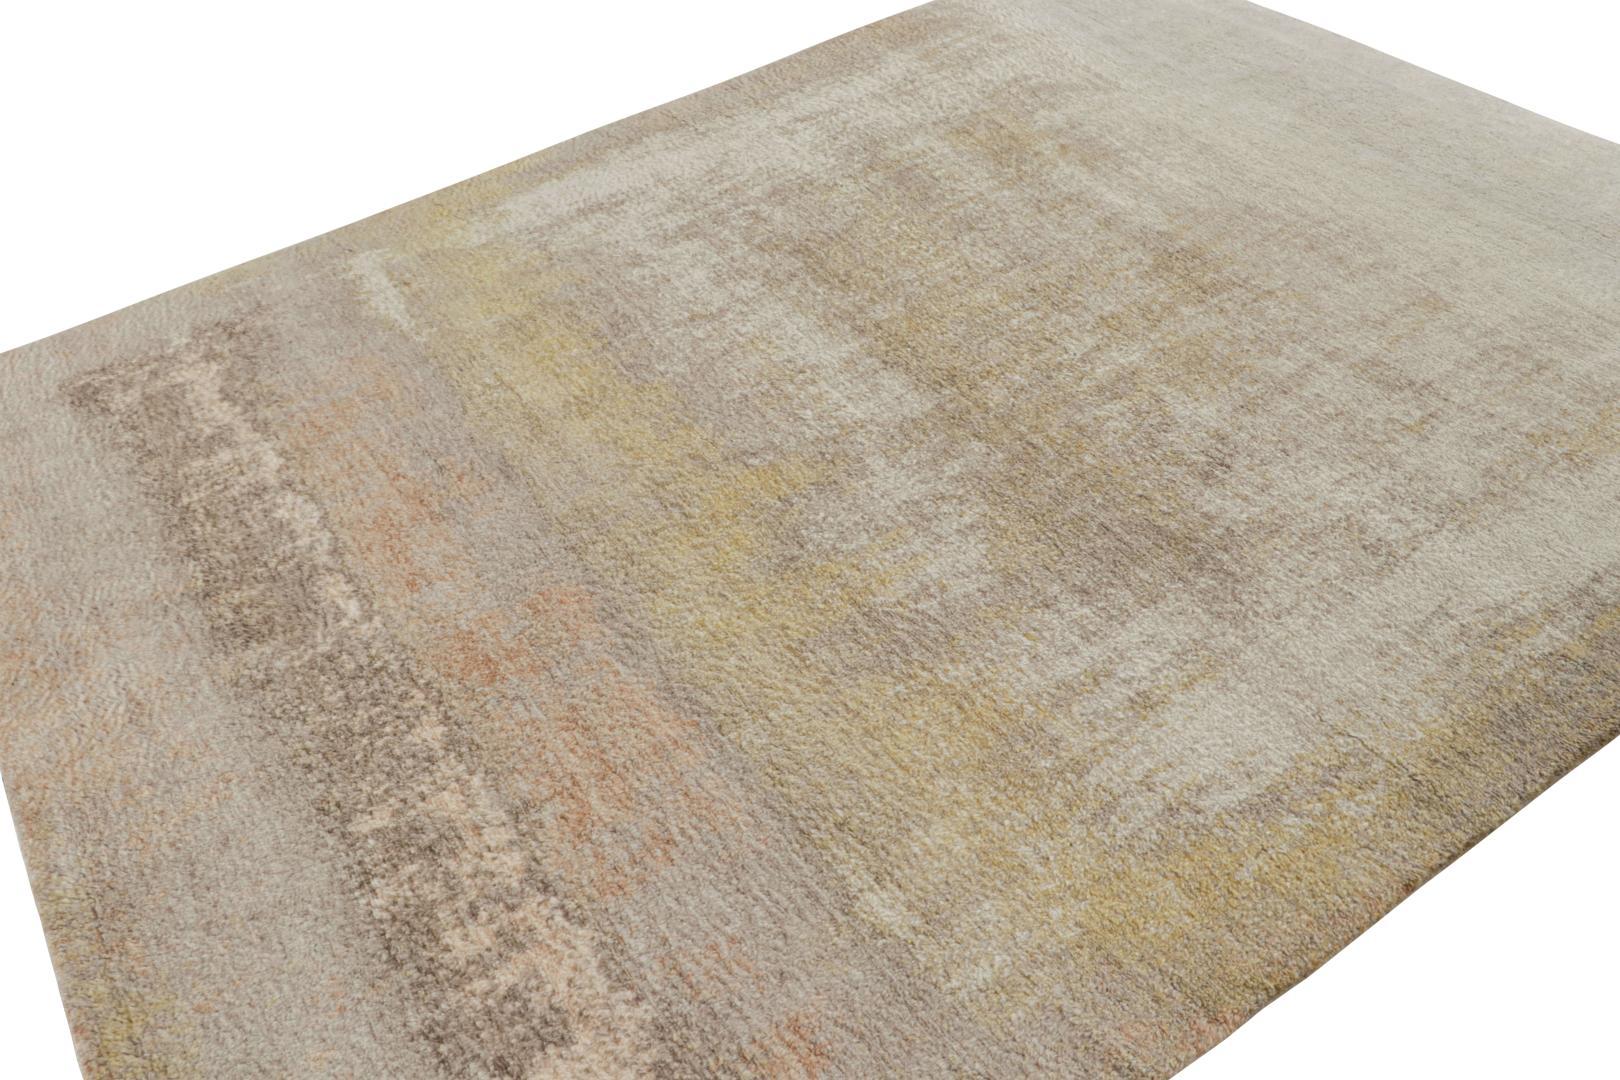 Hand-knotted in a luxurious pashmina, this 8x10 textural high-pile rug is a simple piece of neutrals and a subtle abstract geometric pattern.  

On the Design: 

Keen eyes will admire this neutral rug with abstract geometric patterns and a lush,